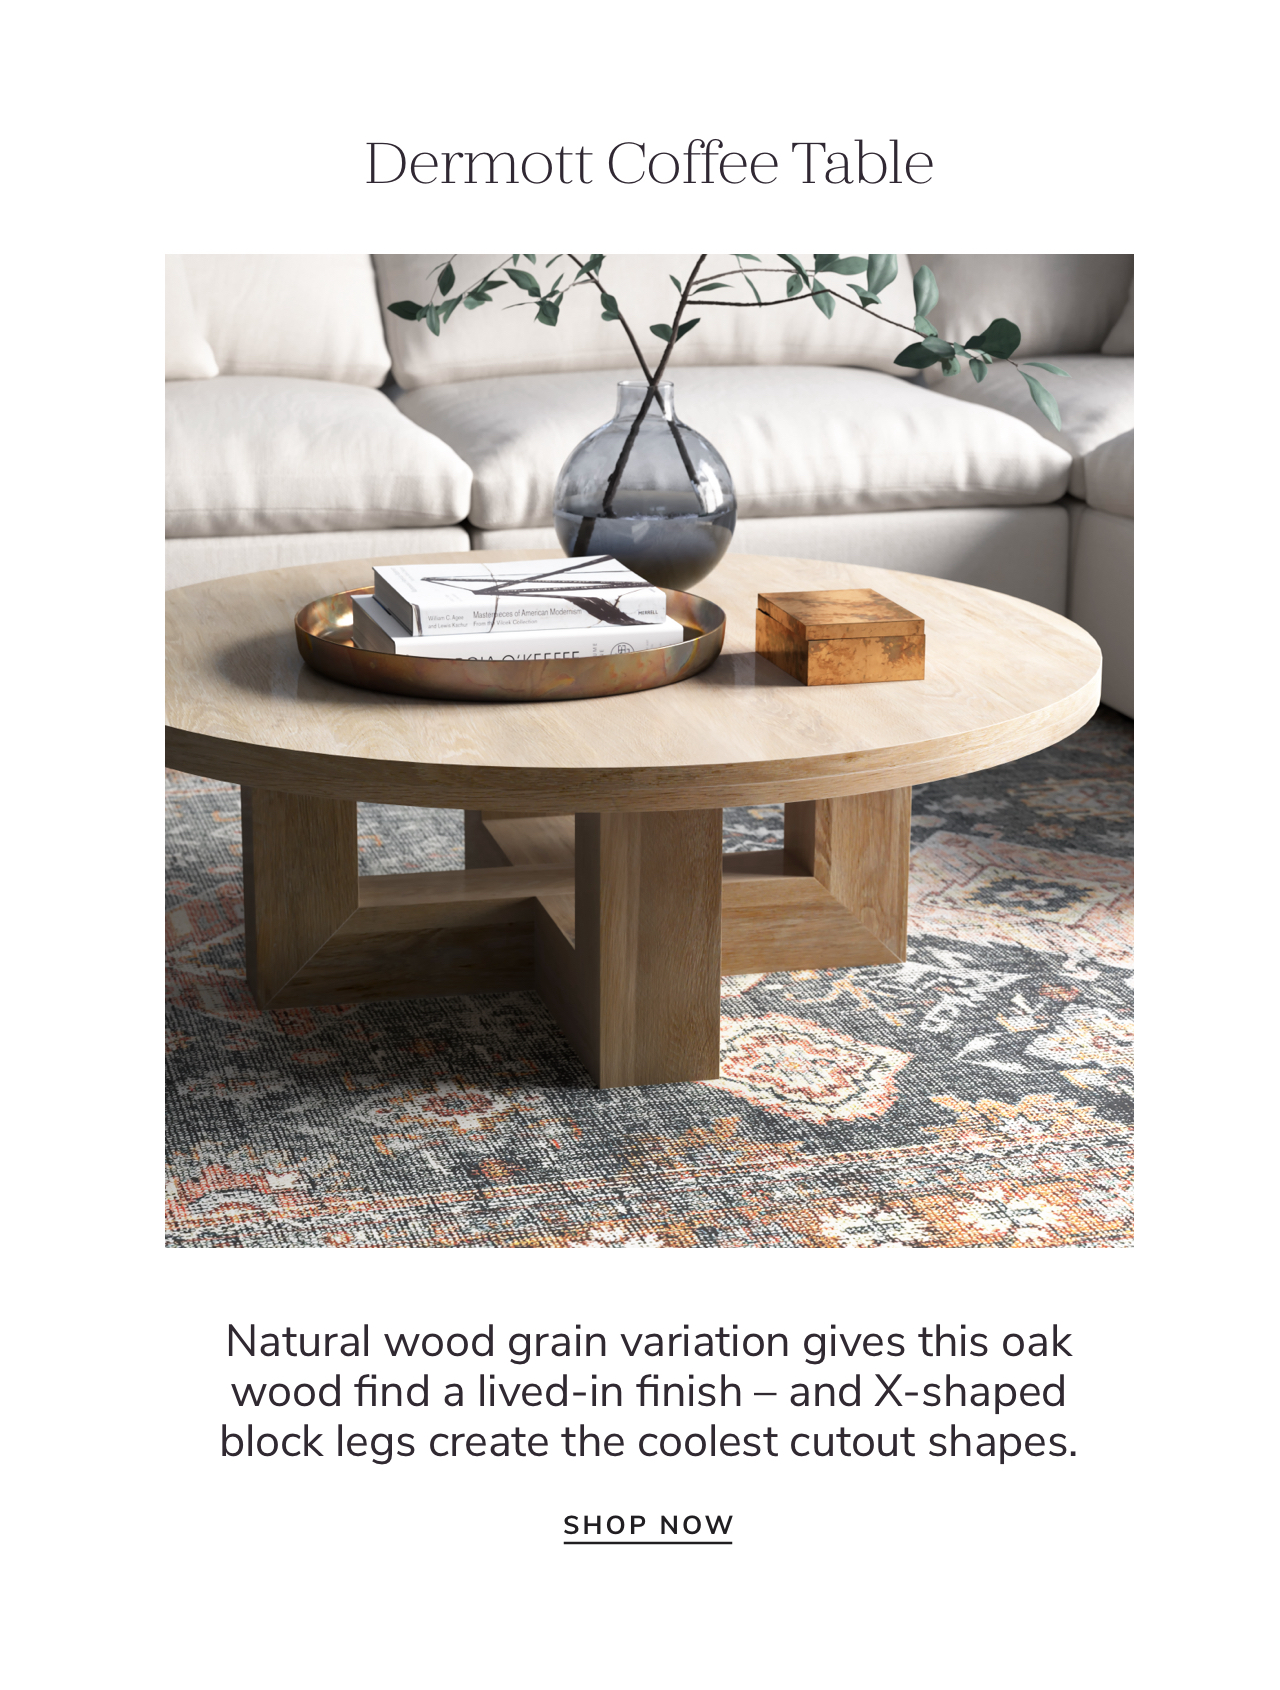 Dermott Coffee Table Natural wood grain variation gives this oak wood find a lived-in finish and X-shaped block legs create the coolest cutout shapes. SHOP NOW 